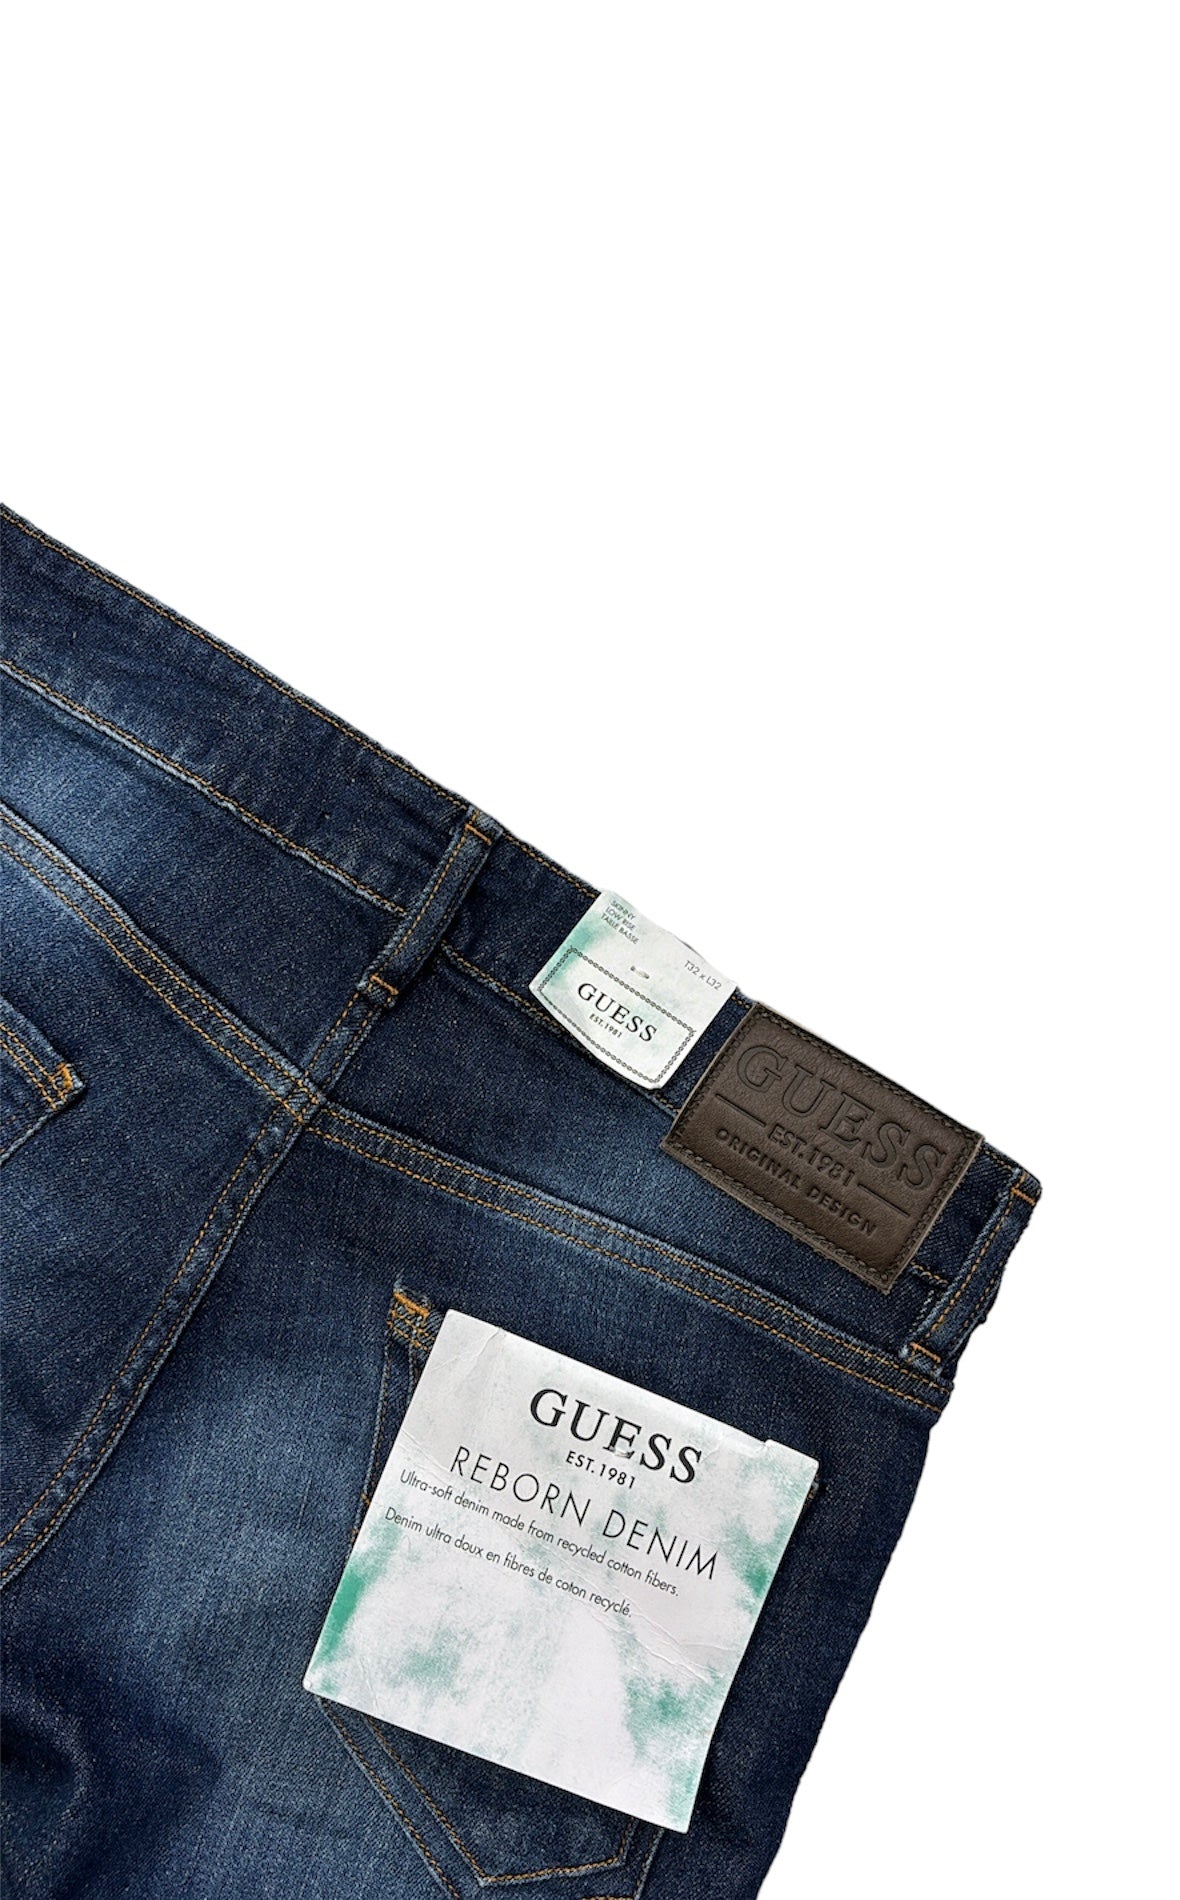 GUESS - Jeans Skinny